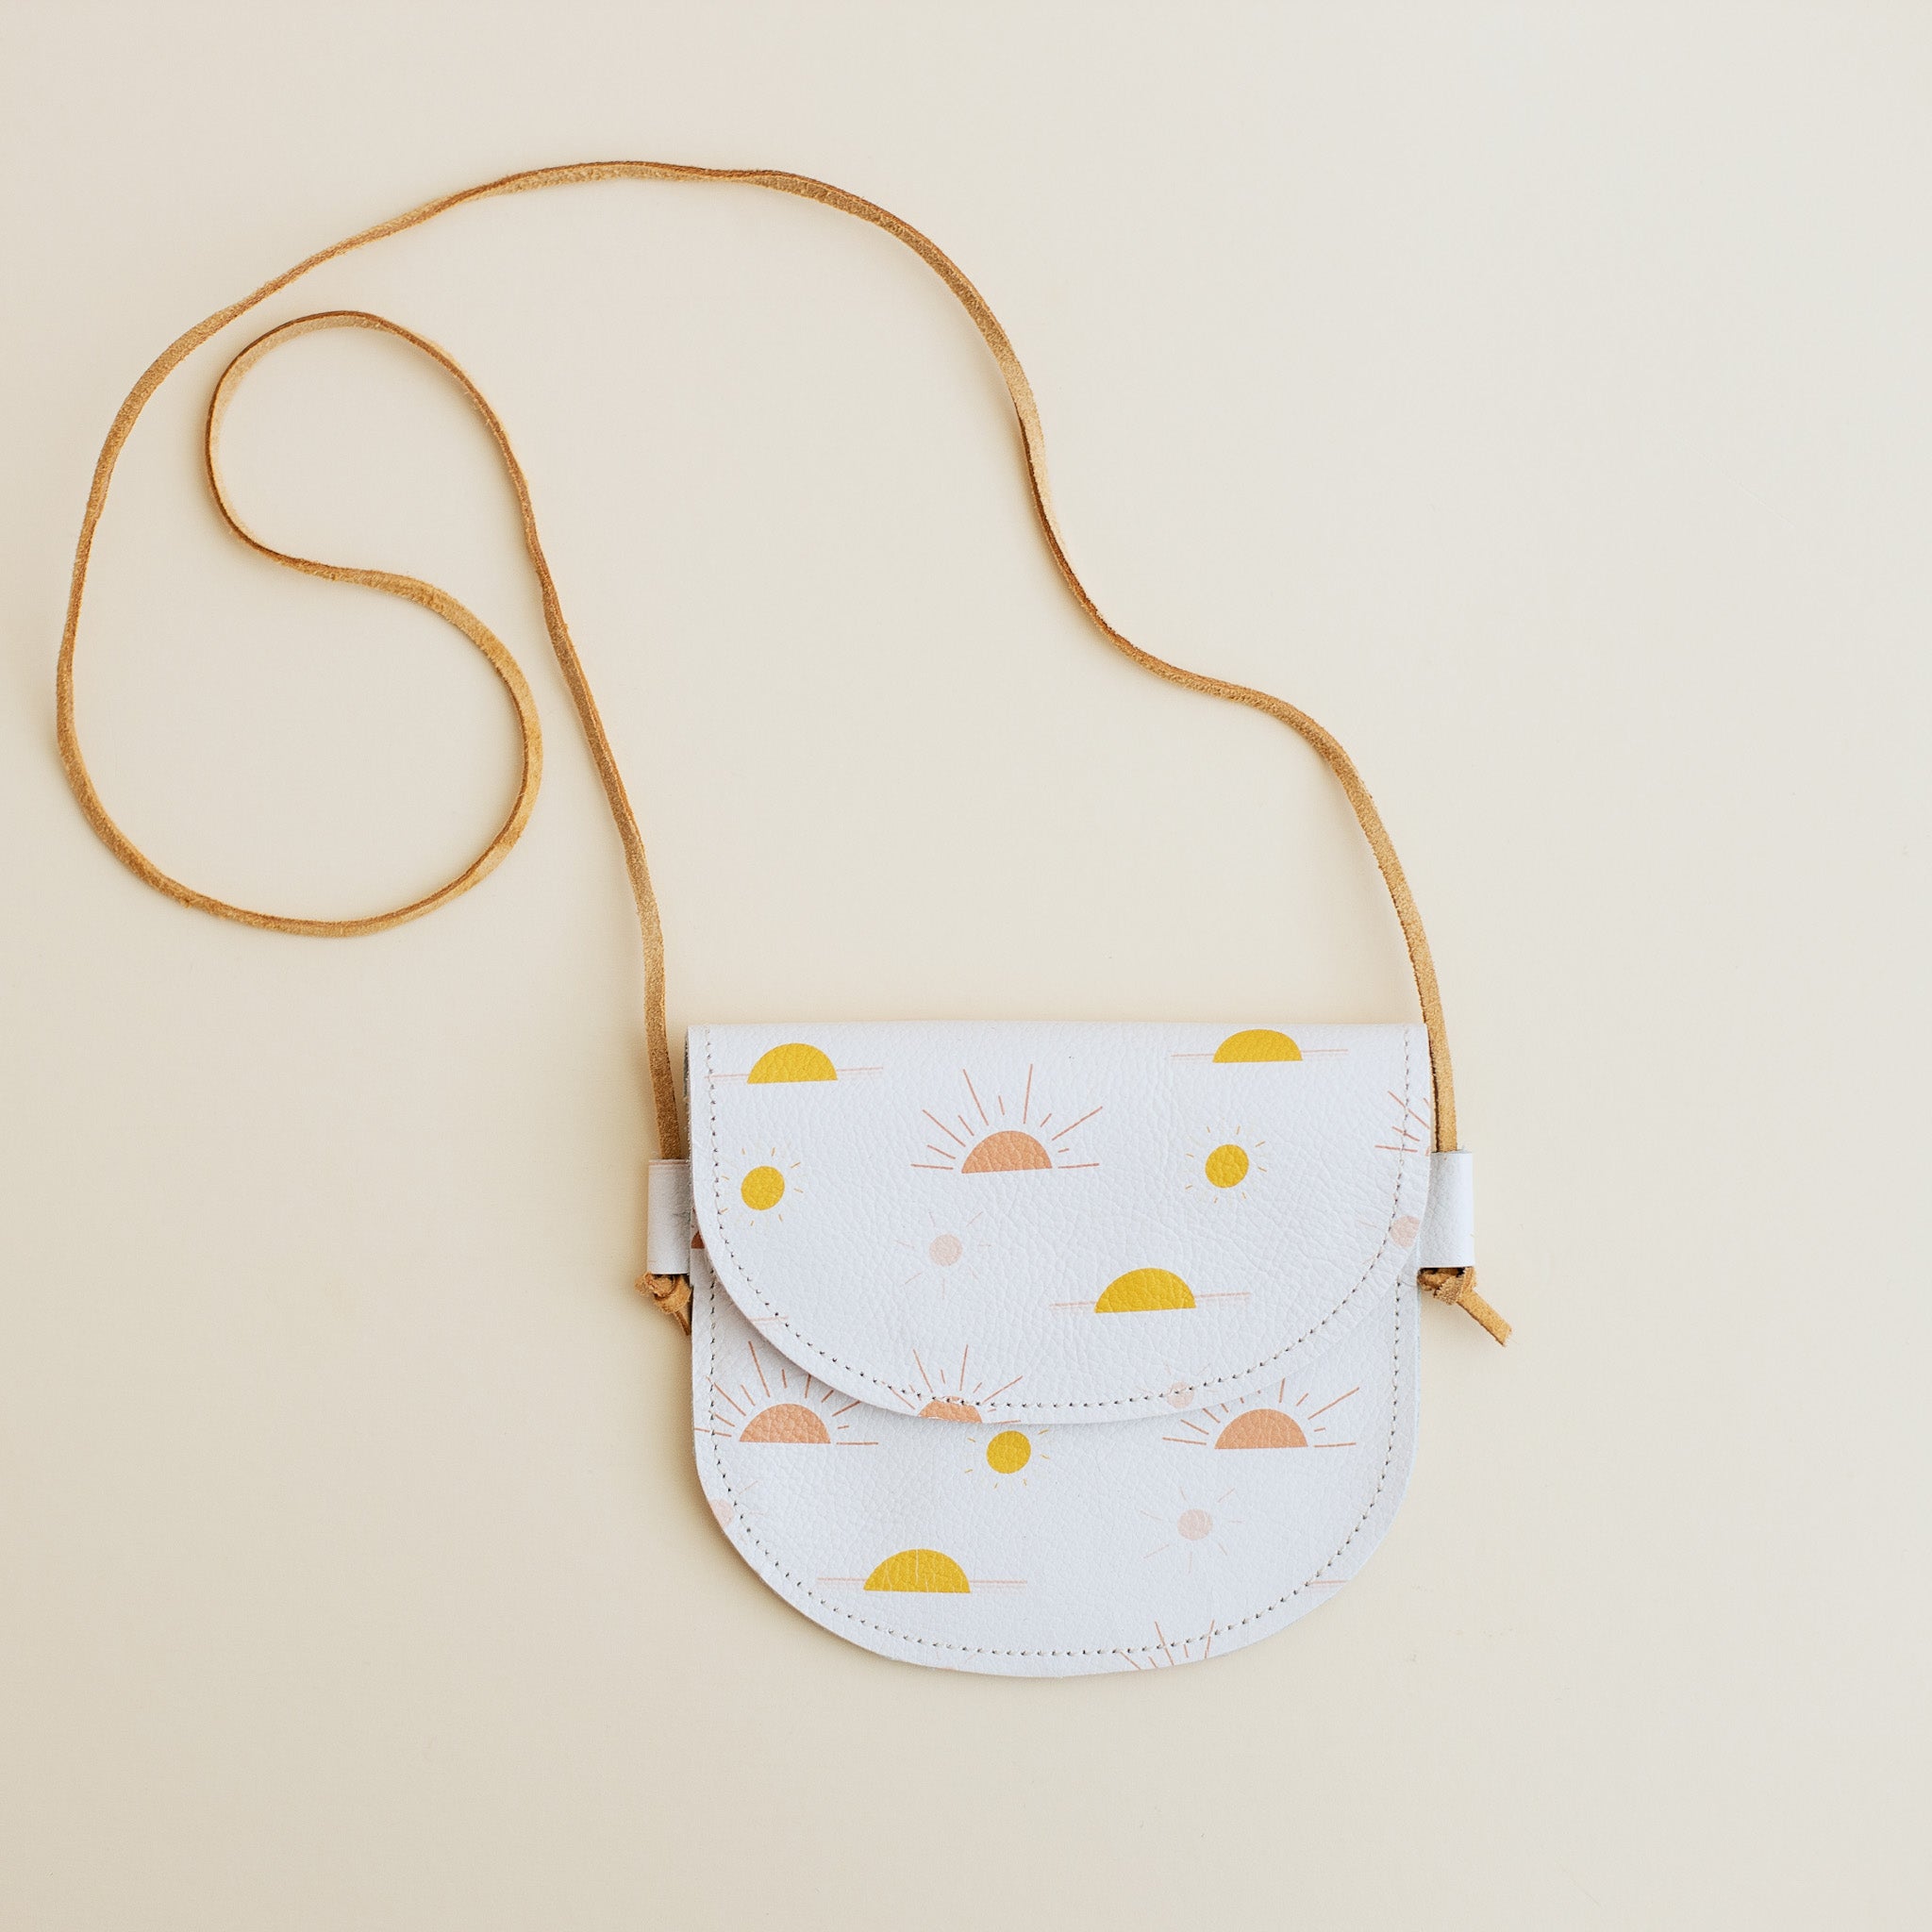 Buy Retro Yellow Honey Bee Purse, Canvas Satchel Bag, Cottagecore Cross  Body Purse, Cute Bee Vegan Leather Strap Hand Bag Online in India - Etsy